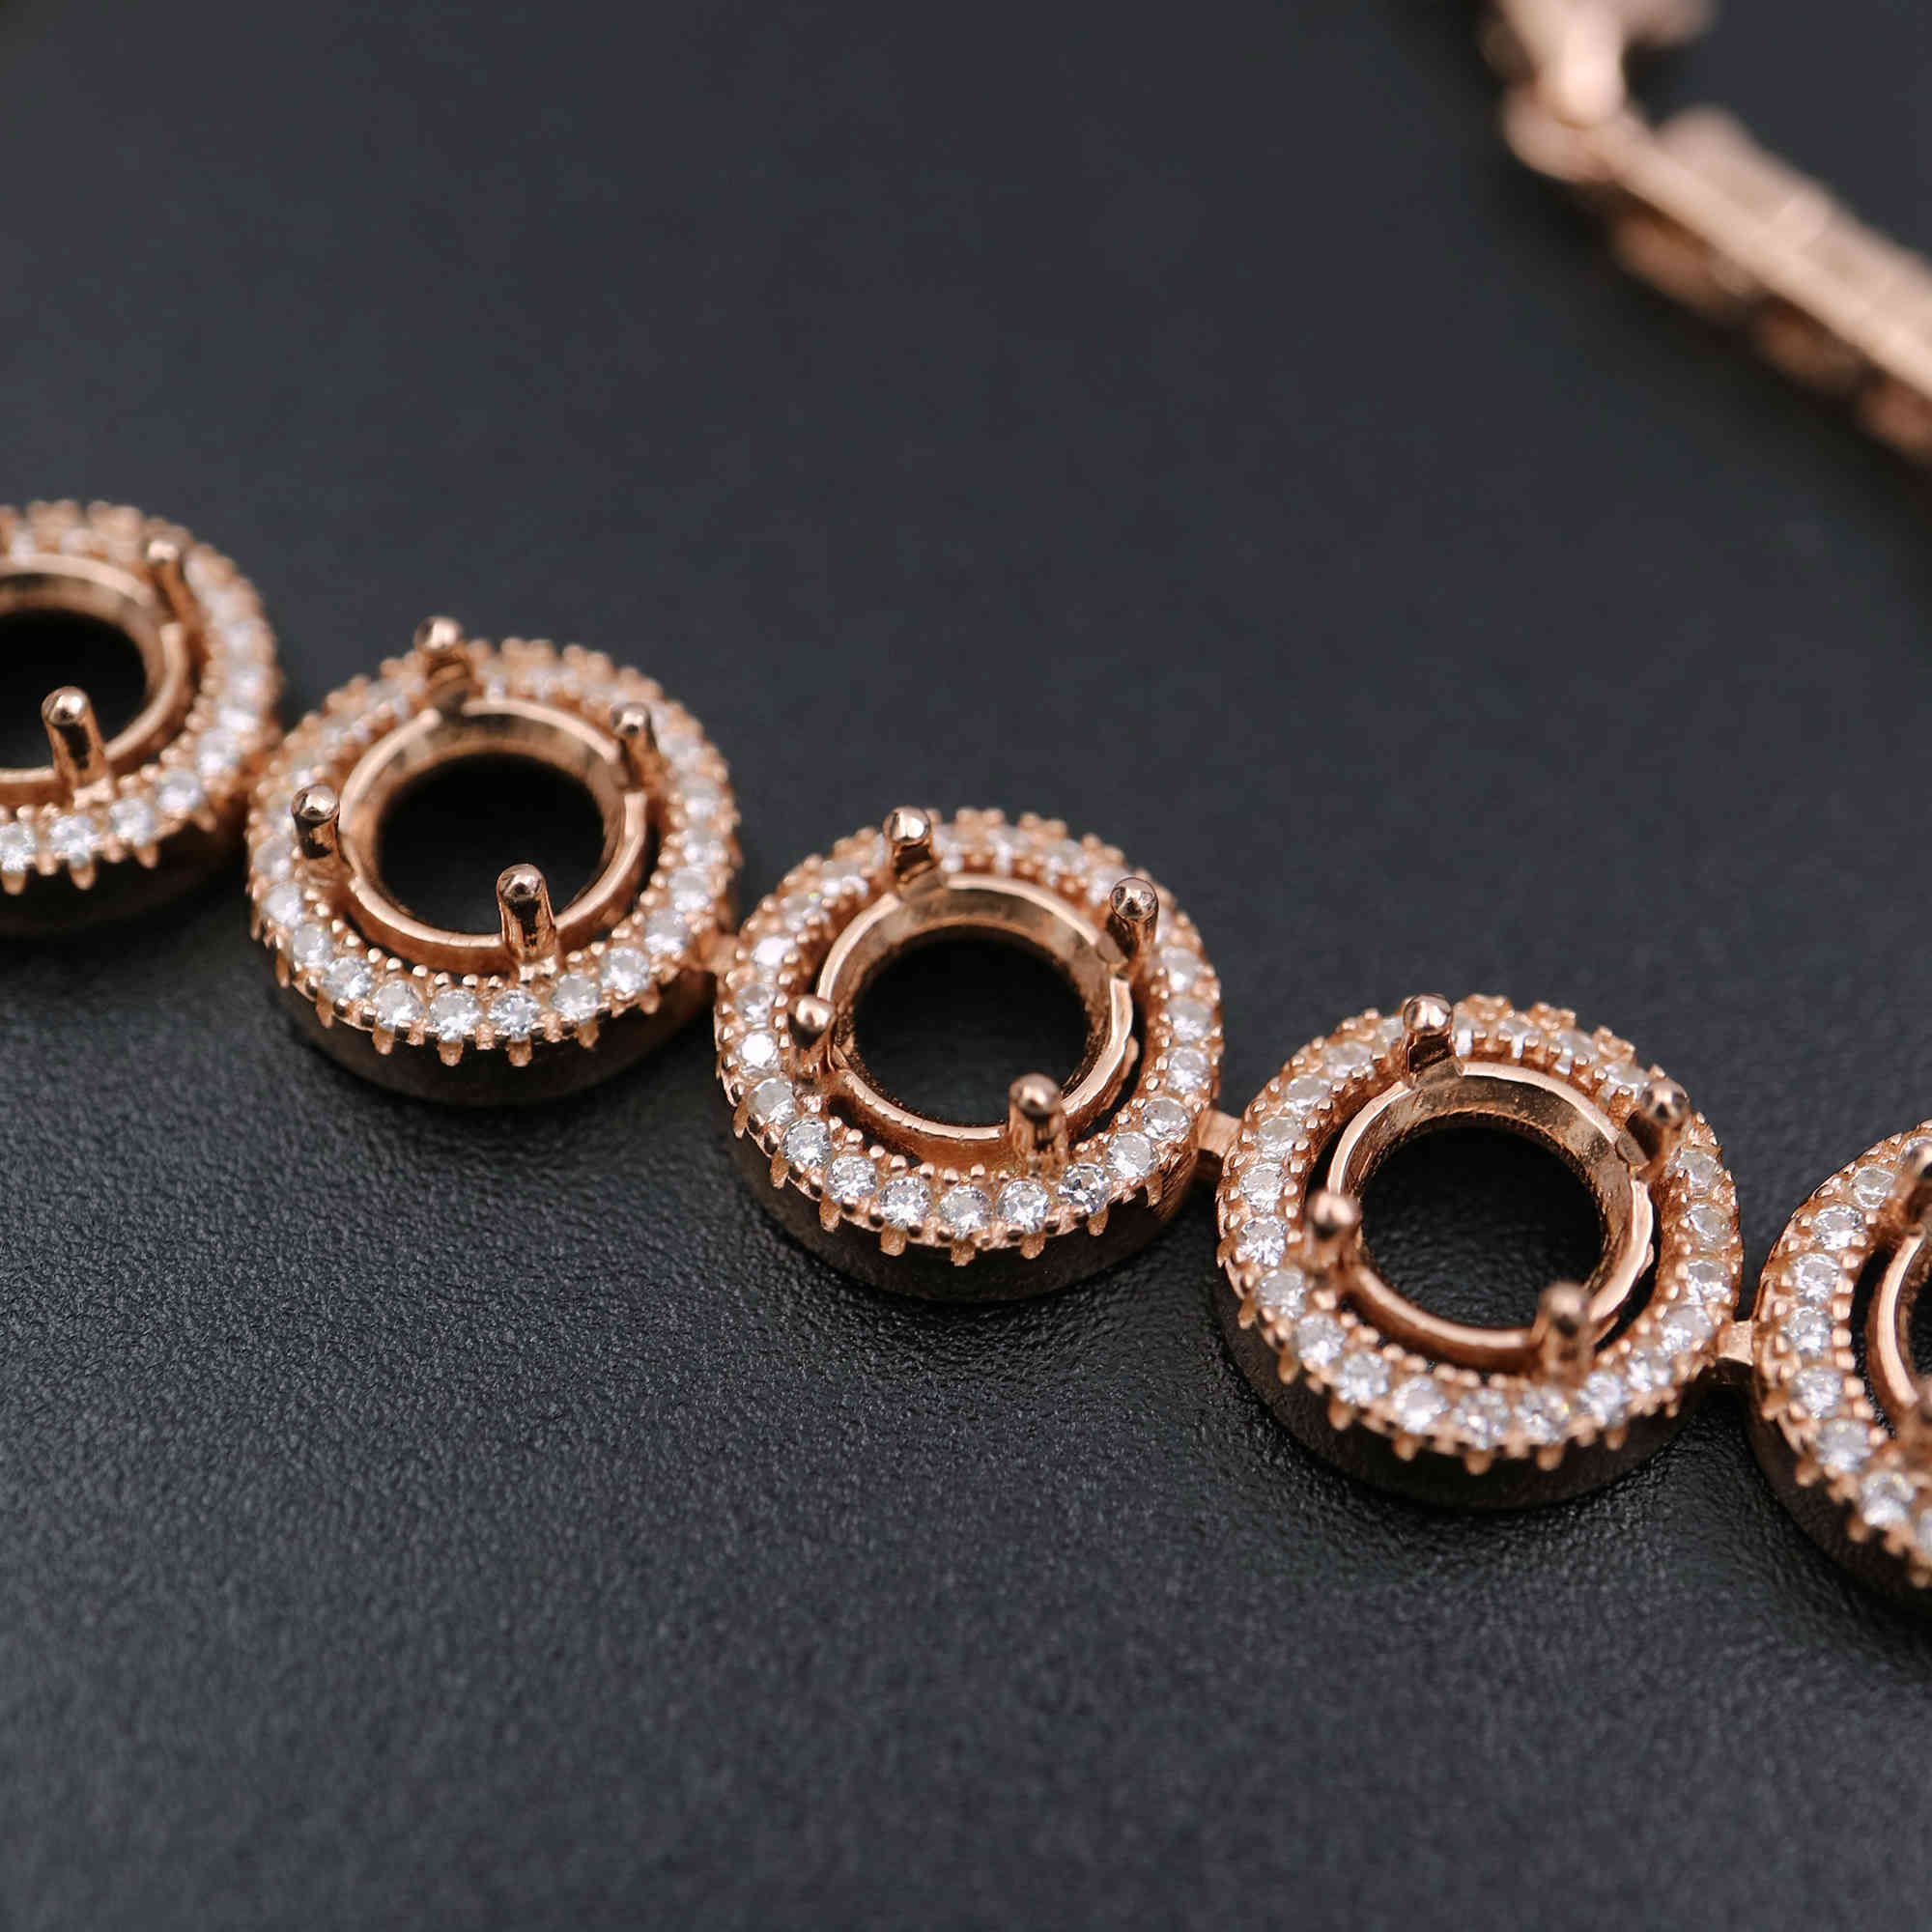 1Pcs 5-6MM Round Bezel Rose Gold Plated Solid 925 Sterling Silver 5 Stones Luxury Bracelet Settings 5.5Inches+2Inches Extension Chain 1900223 - Click Image to Close